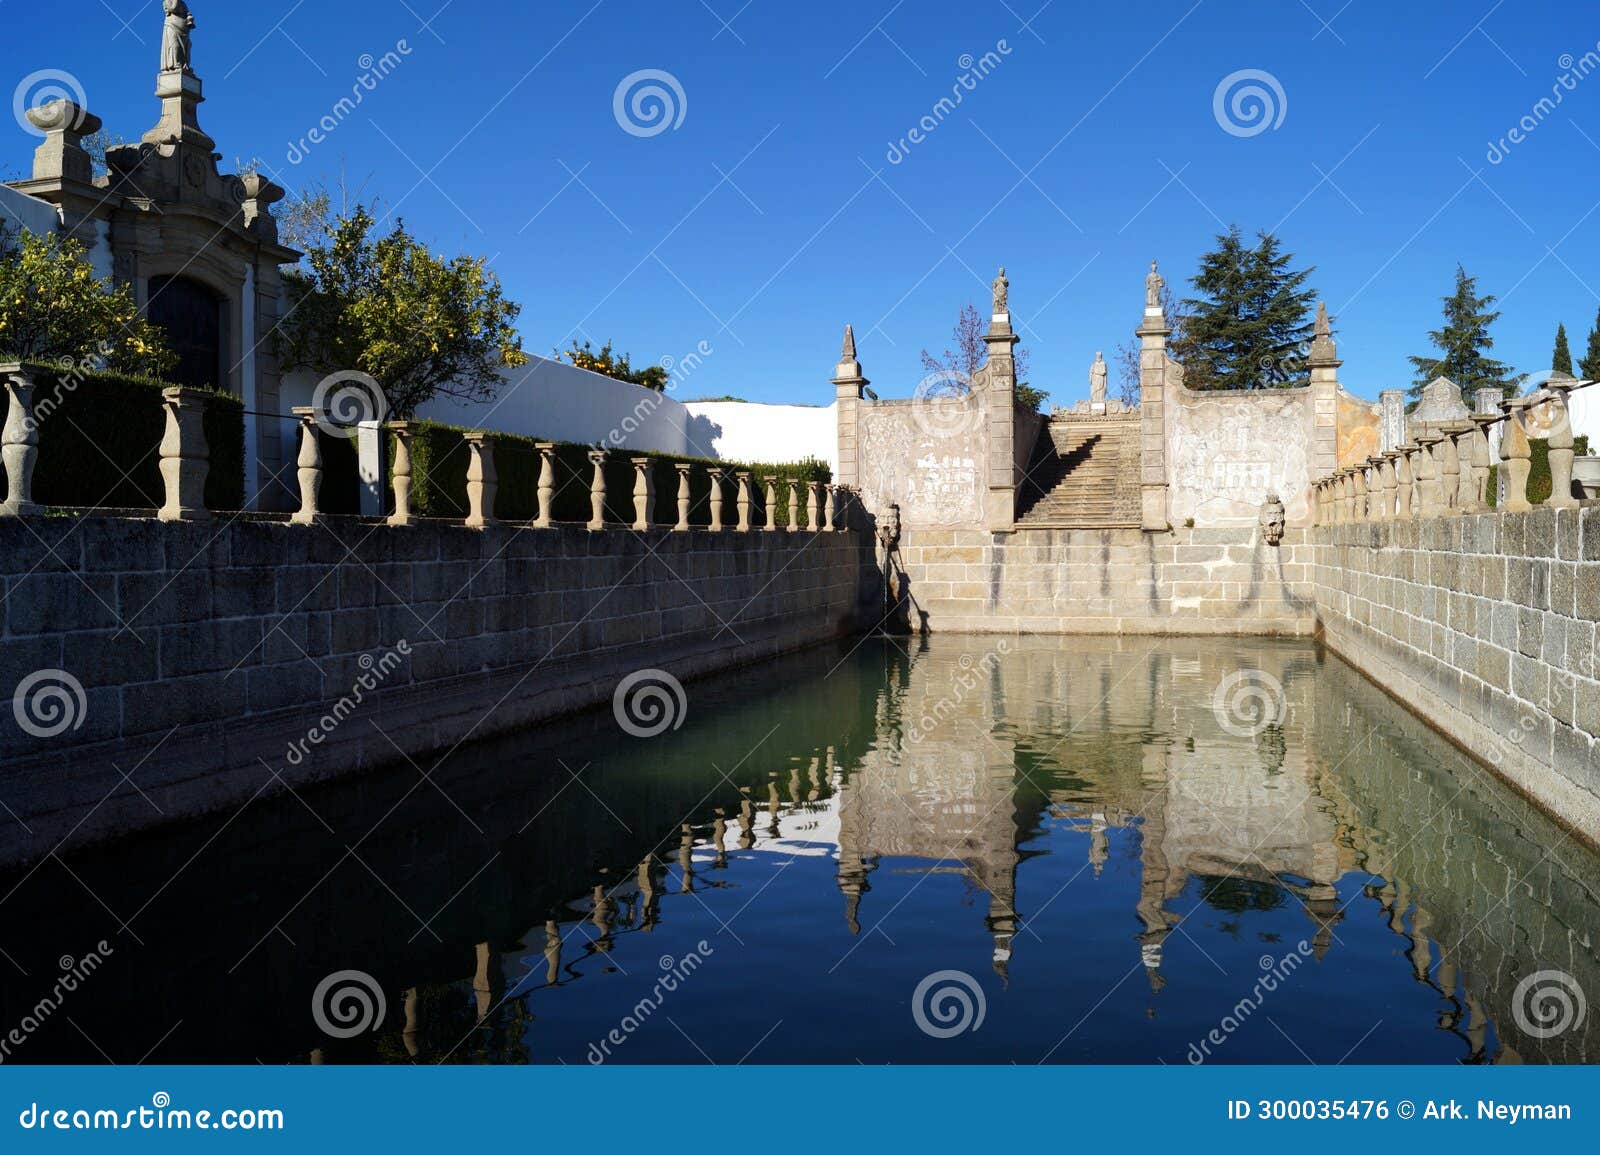 water reservoir with cascade fountain in the garden of the episcopal palace, jardim do paco, castelo branco, portugal